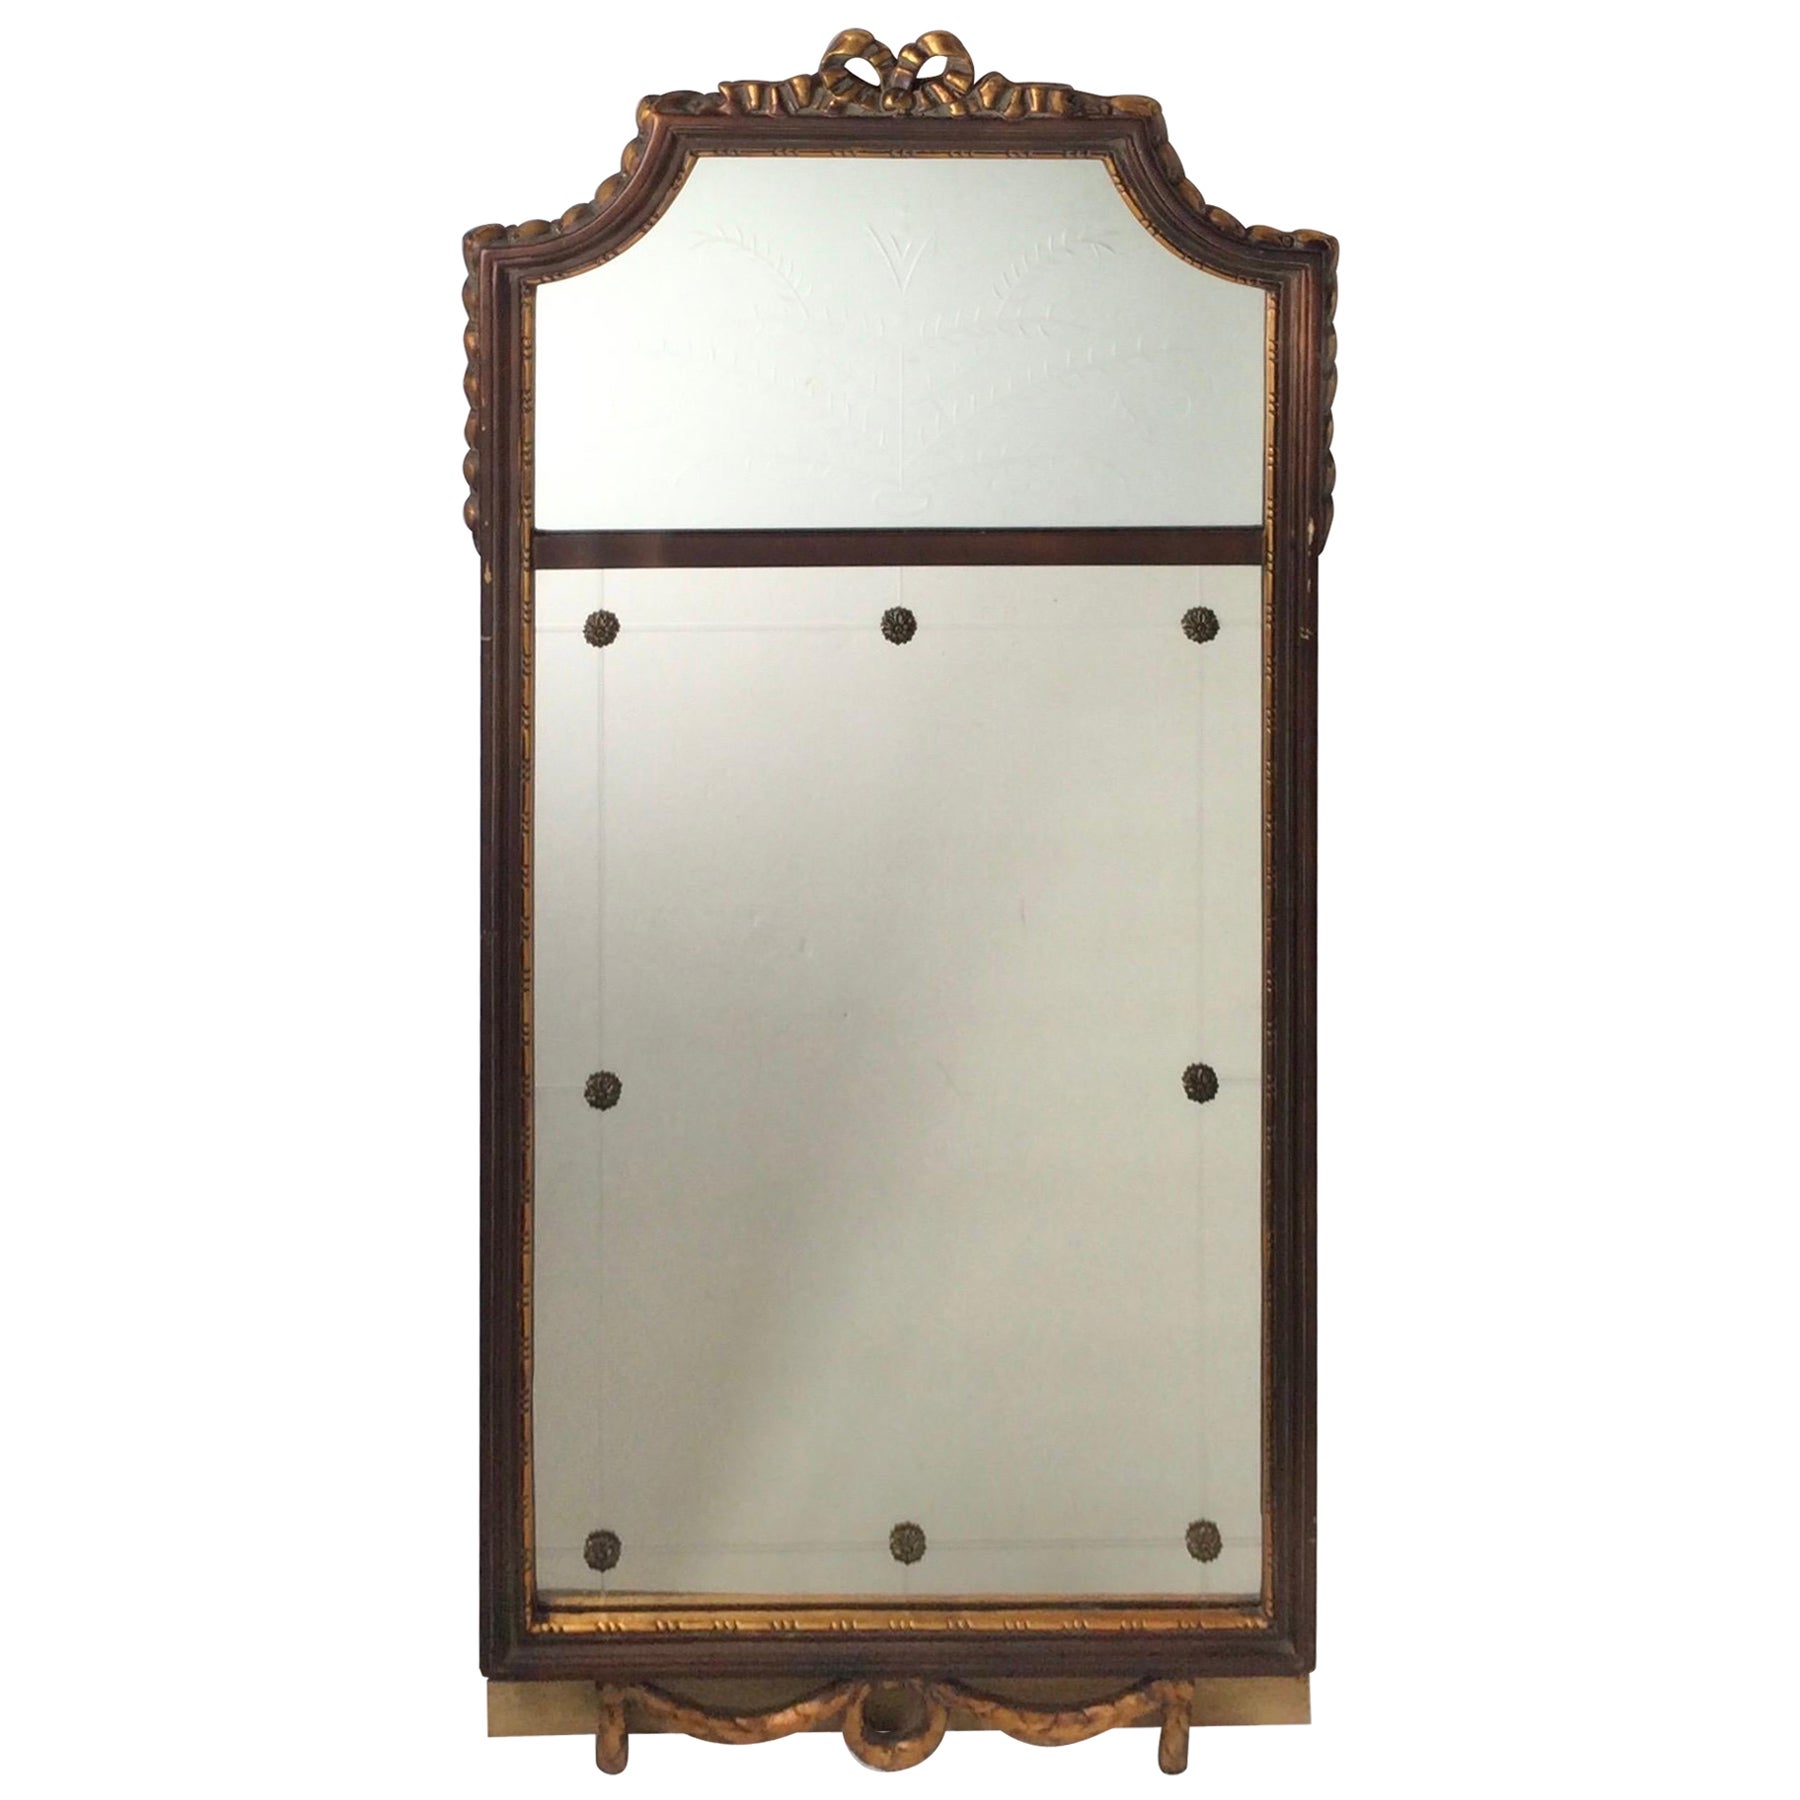 20th Century Gilt Wood Mirror with Etched Design